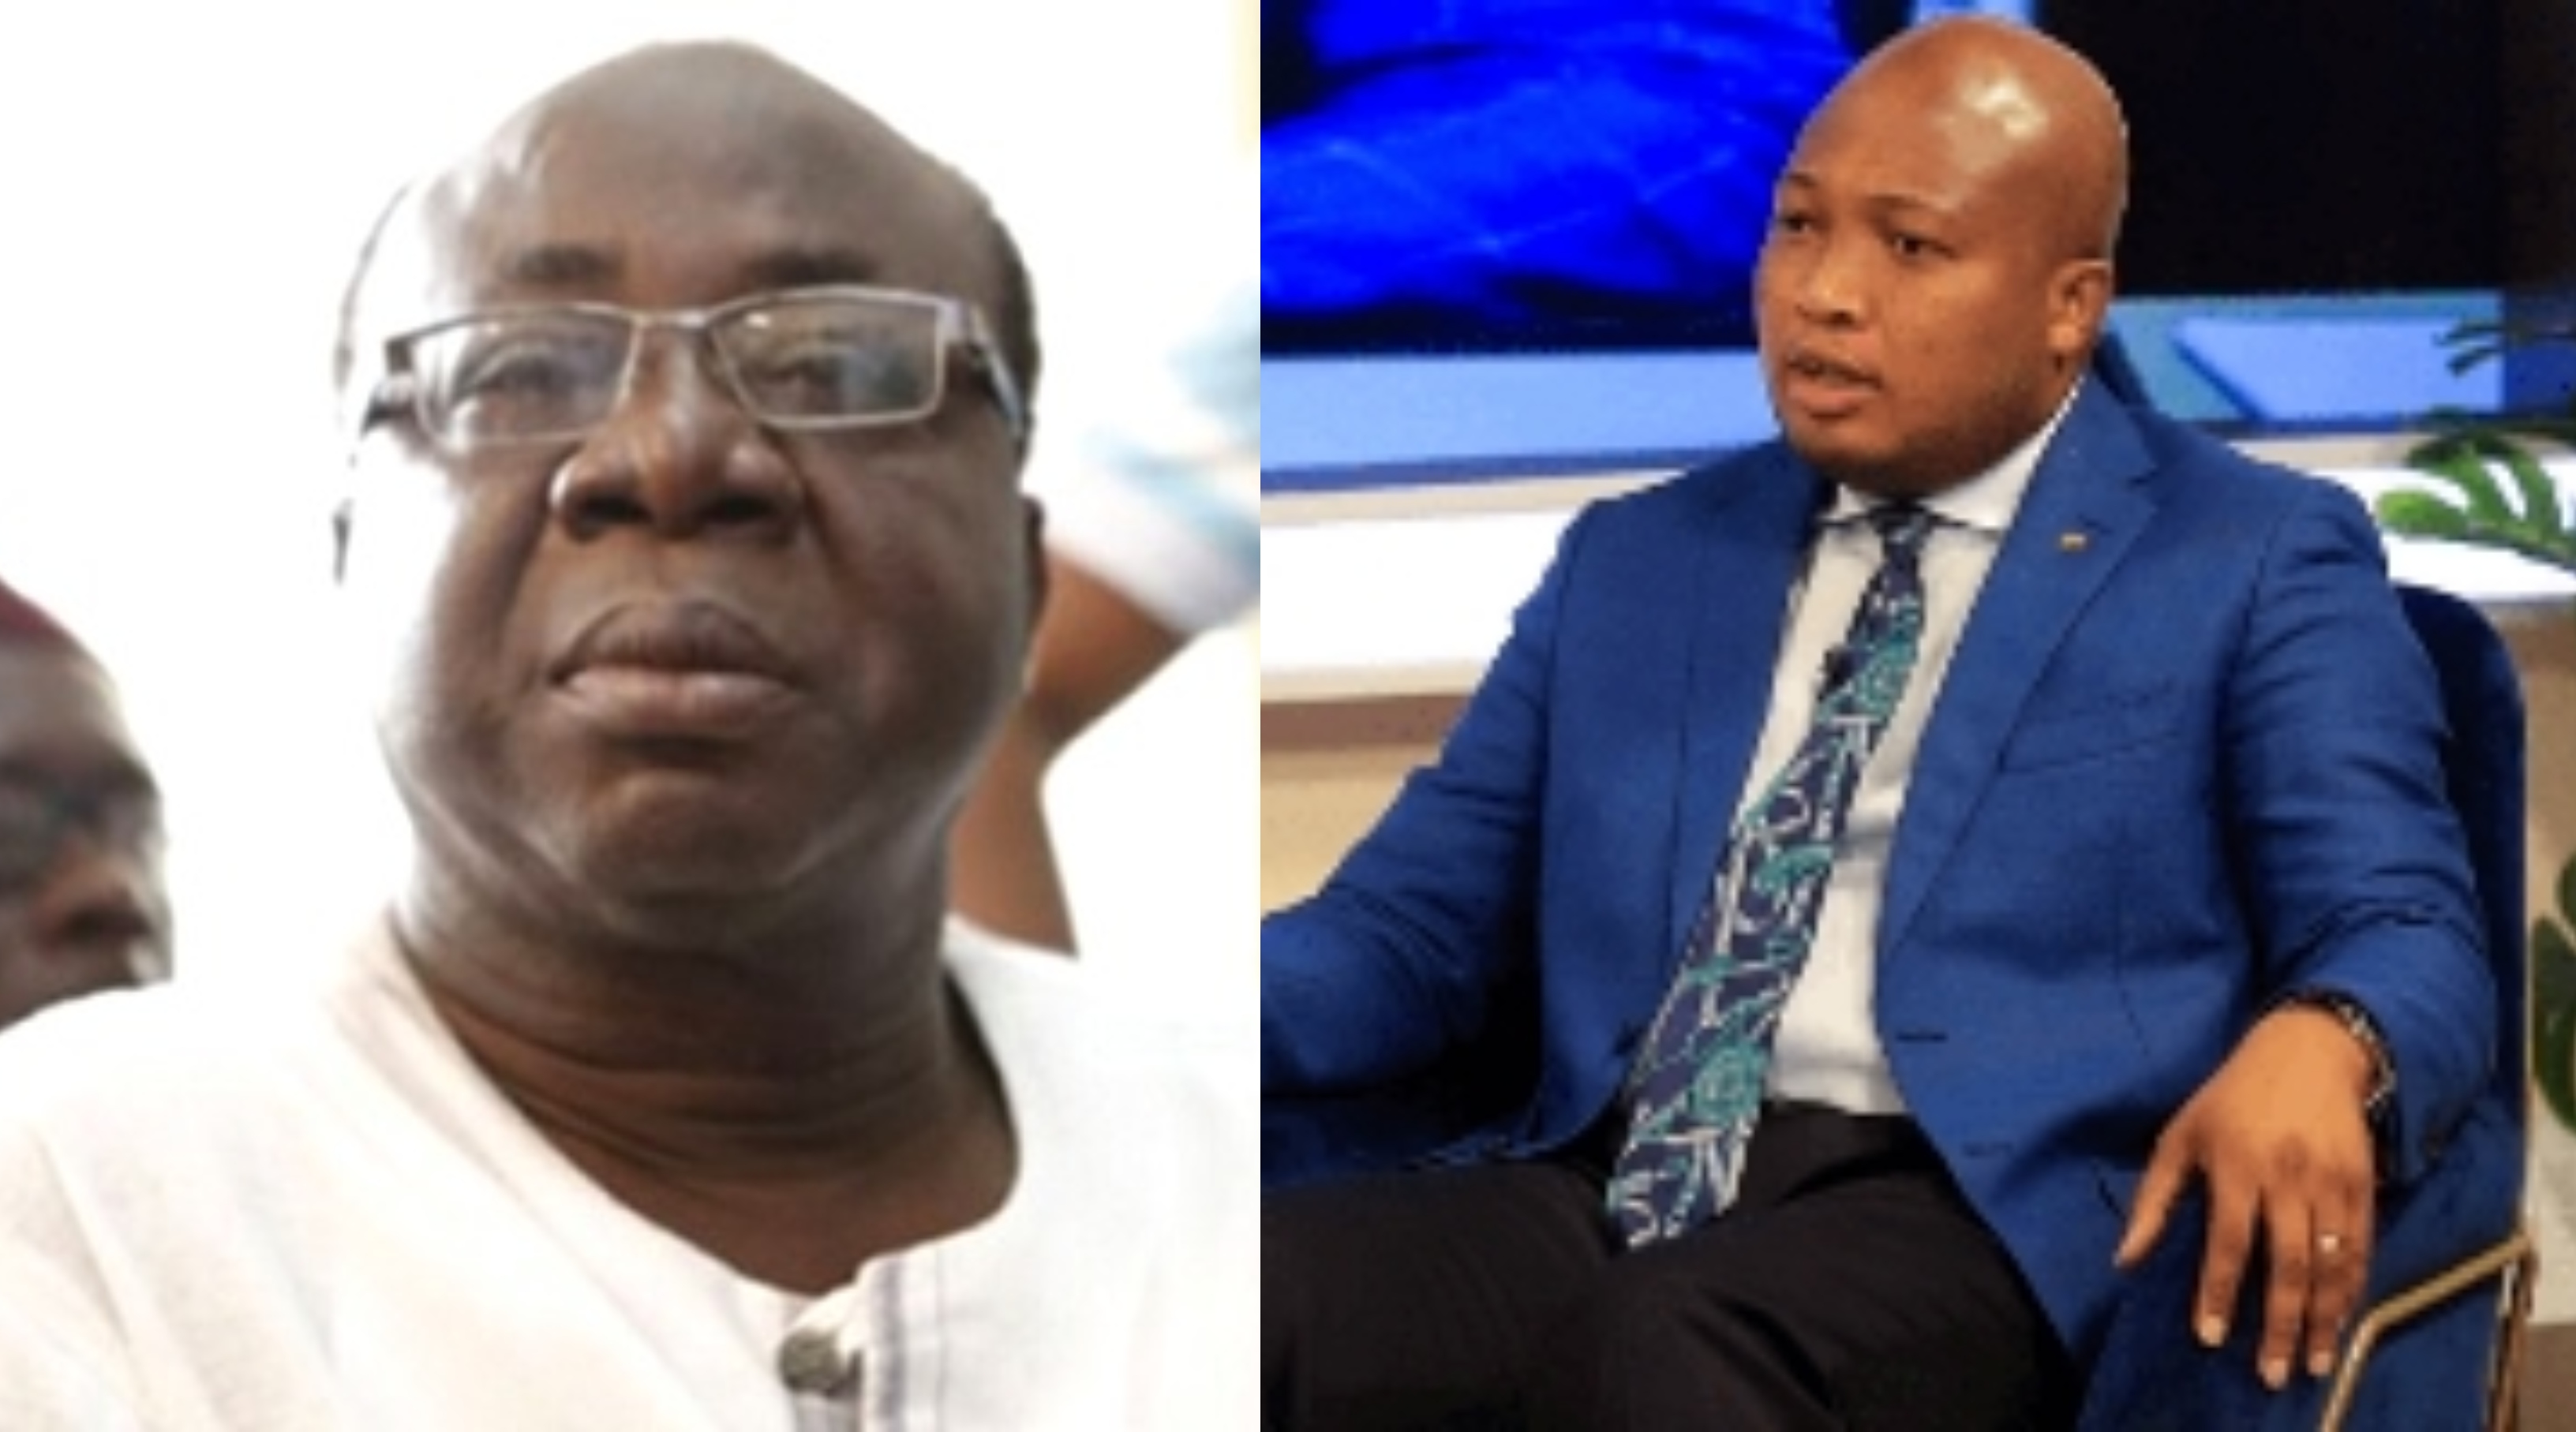 Go to court; I can't retract the truth - Ablakwa dares apology-seeking Fredie Blay